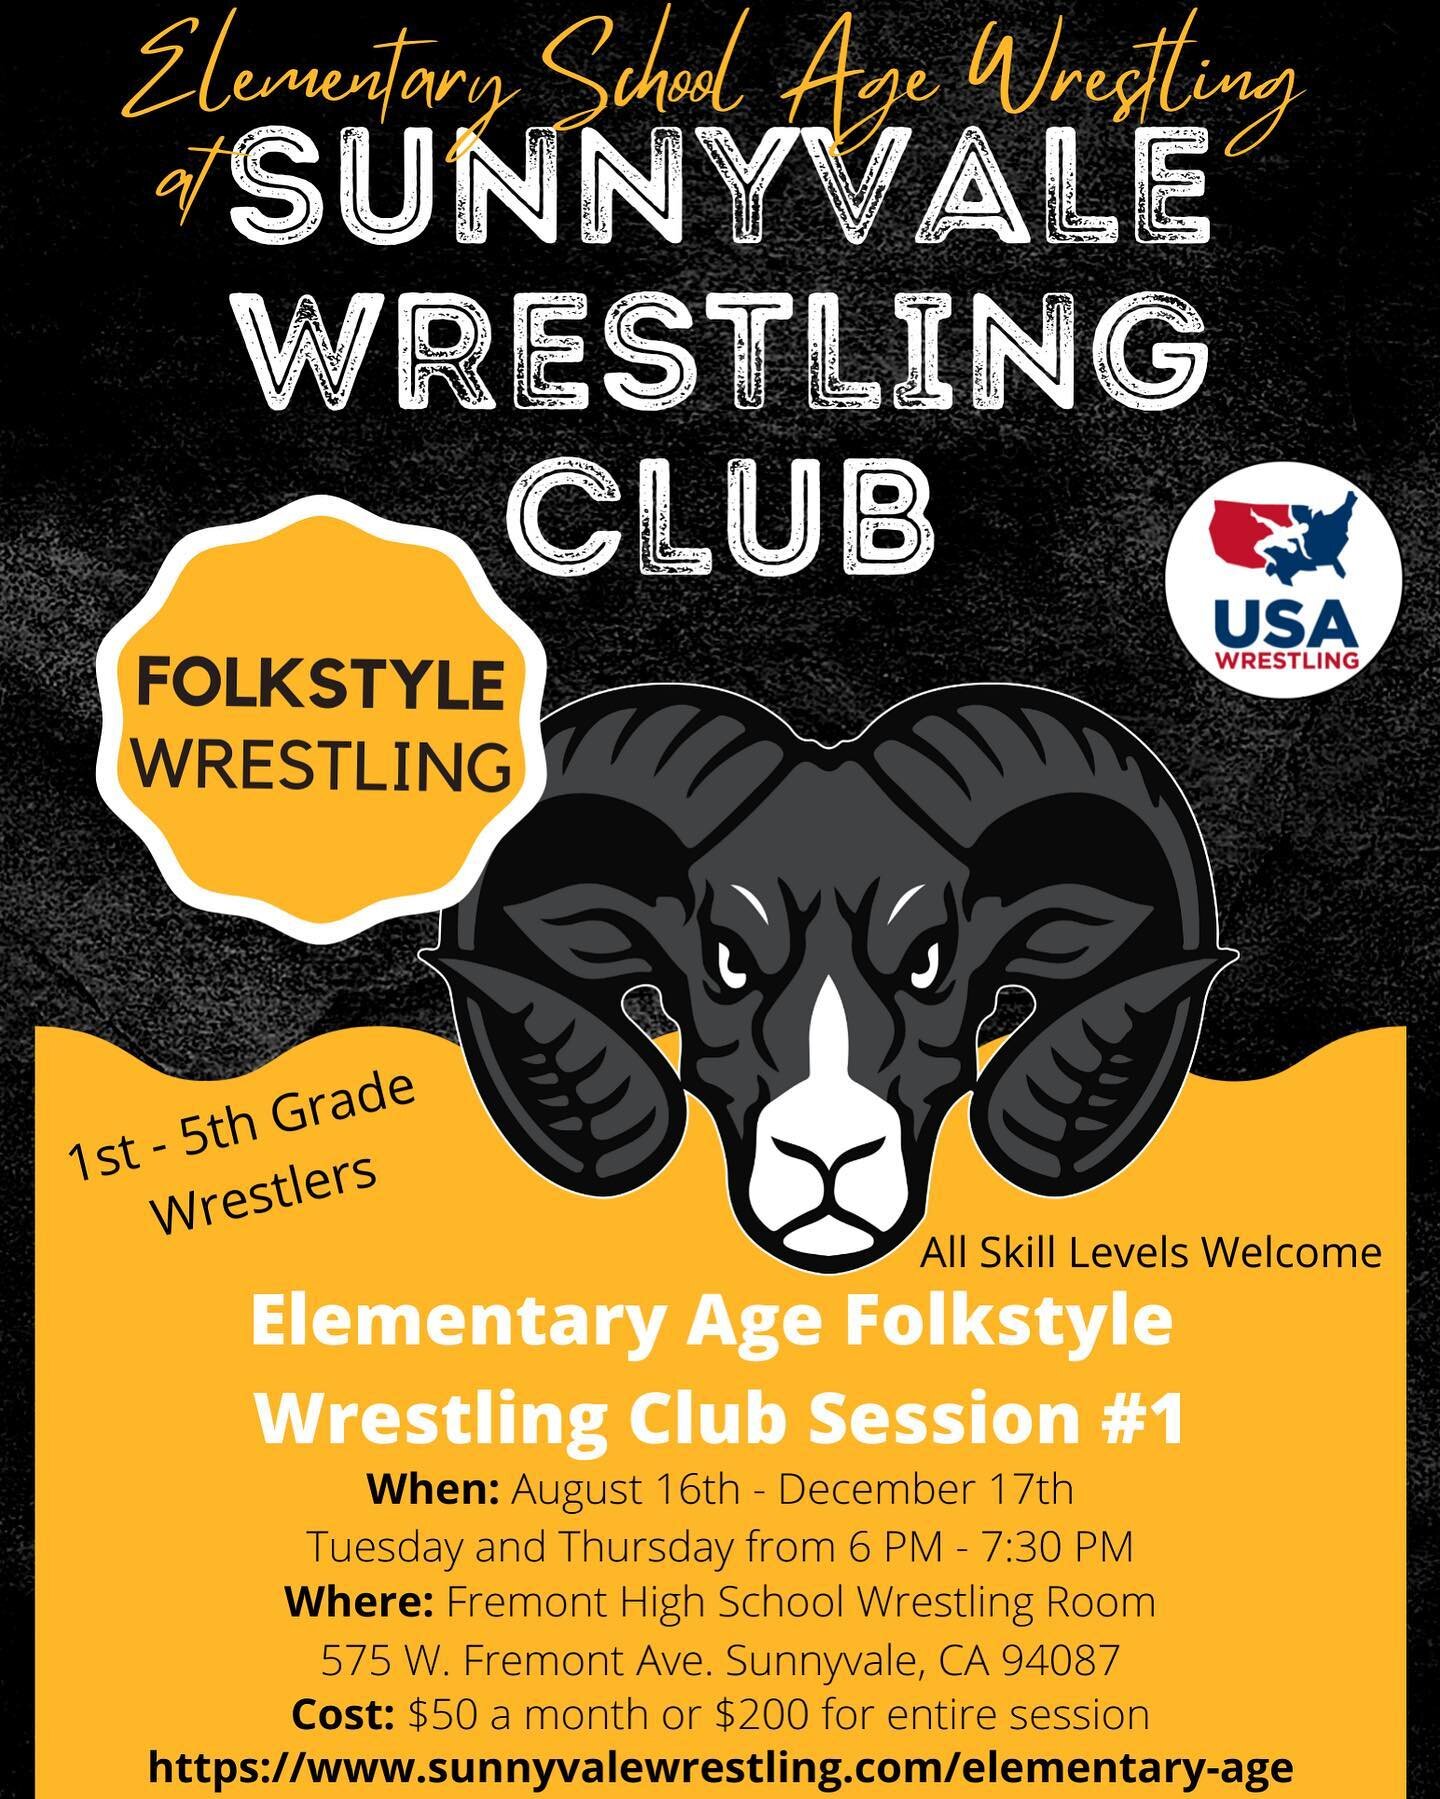 FINALLY!!! Our elementary school age club is back. Coach Austin will be running practices again starting in August. Link in the bio or https://www.sunnyvalewrestling.com/elementary-age on Facebook.